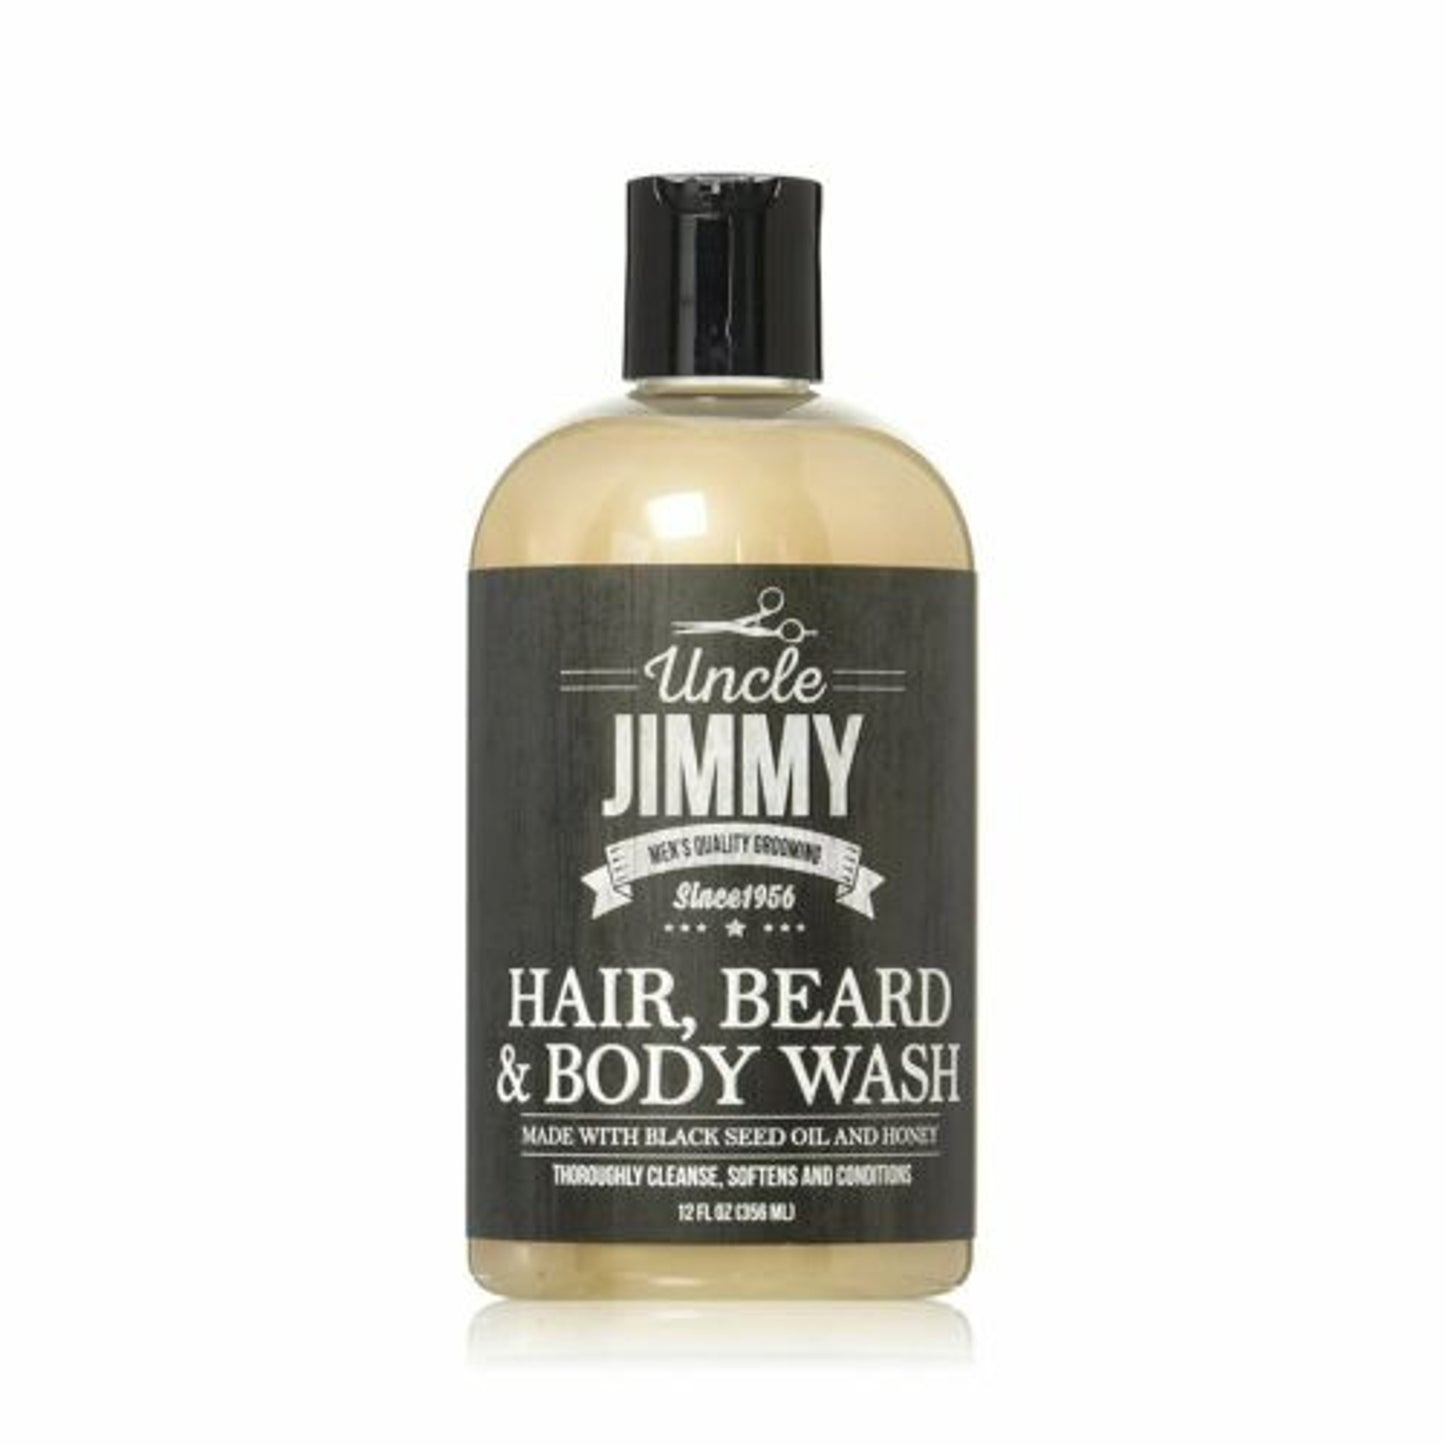 Uncle Jimmy Hair, Beard, and Body Wash - 12oz